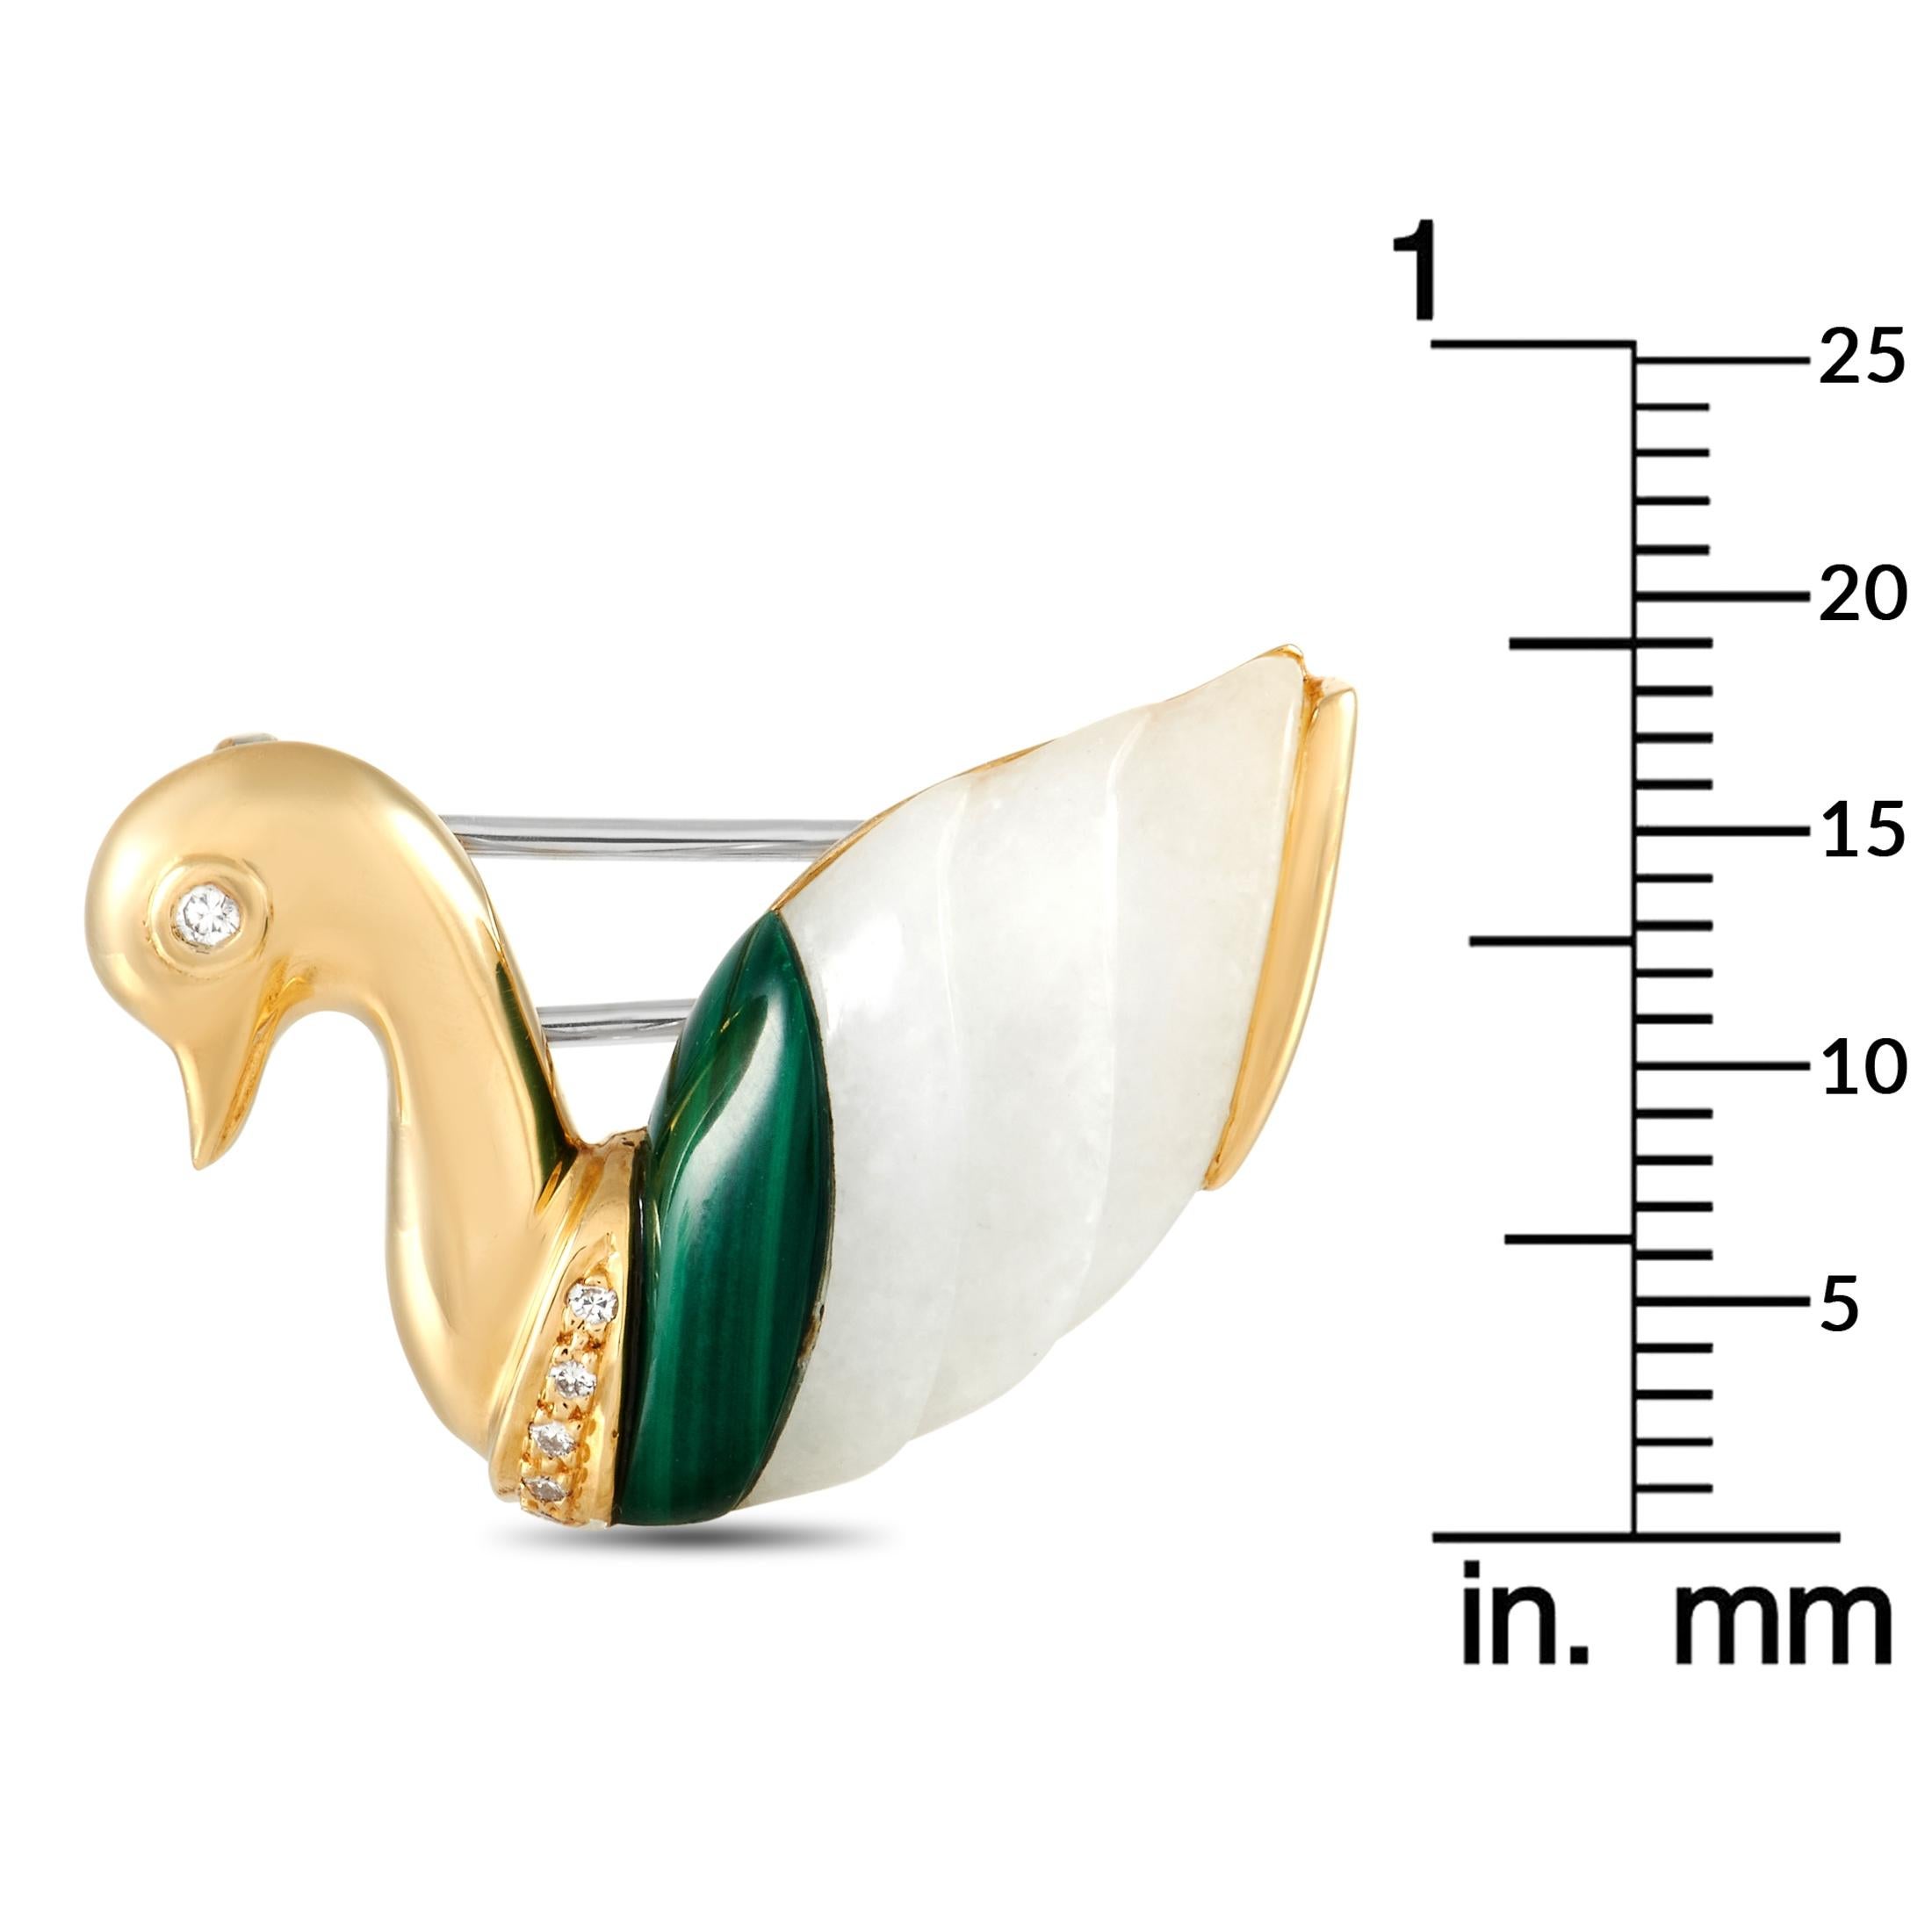 Round Cut Dominique Arpels 18K Yellow Gold Diamond, Malachite and Jade Swan Brooch